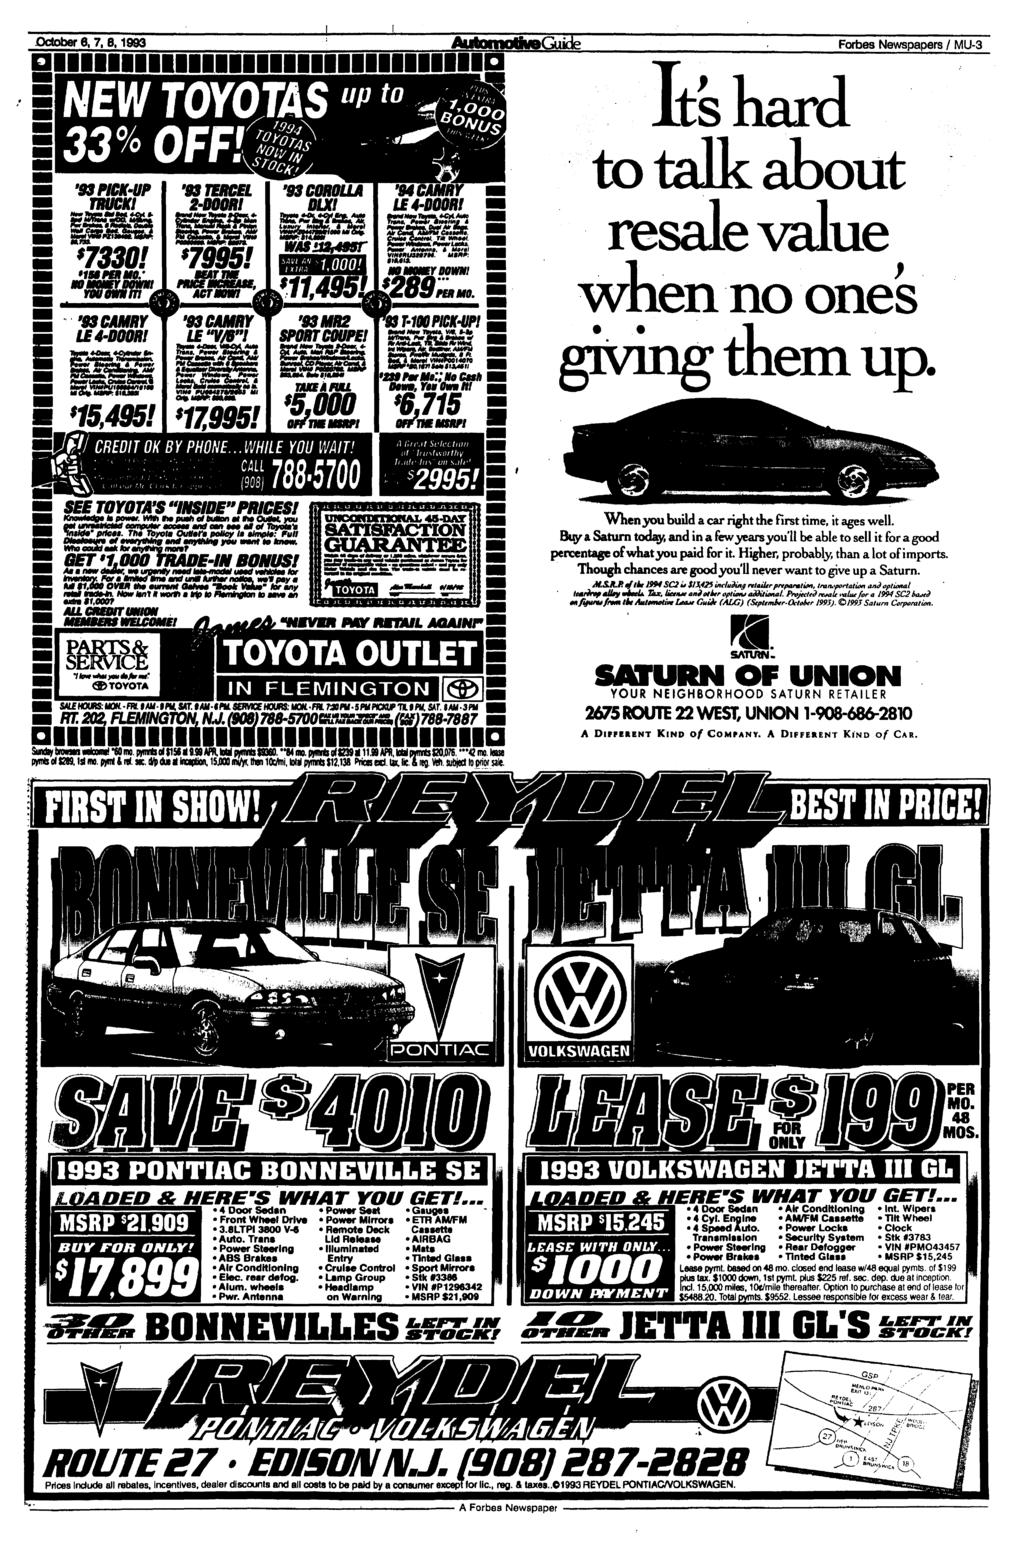 October 6,7, 8.1993 Forbes Newspapers / MU-3 NEW TOYOTAS u " '93 PICK-UP TRUCK! S $ 7330! '93CAMRY LE4-D00R! *15,495! s '83TERCEL 2-D00R1 '93CAMRY IF «VM»! '93 COROLLA DLX! '93MR2 SPORT COUPE!